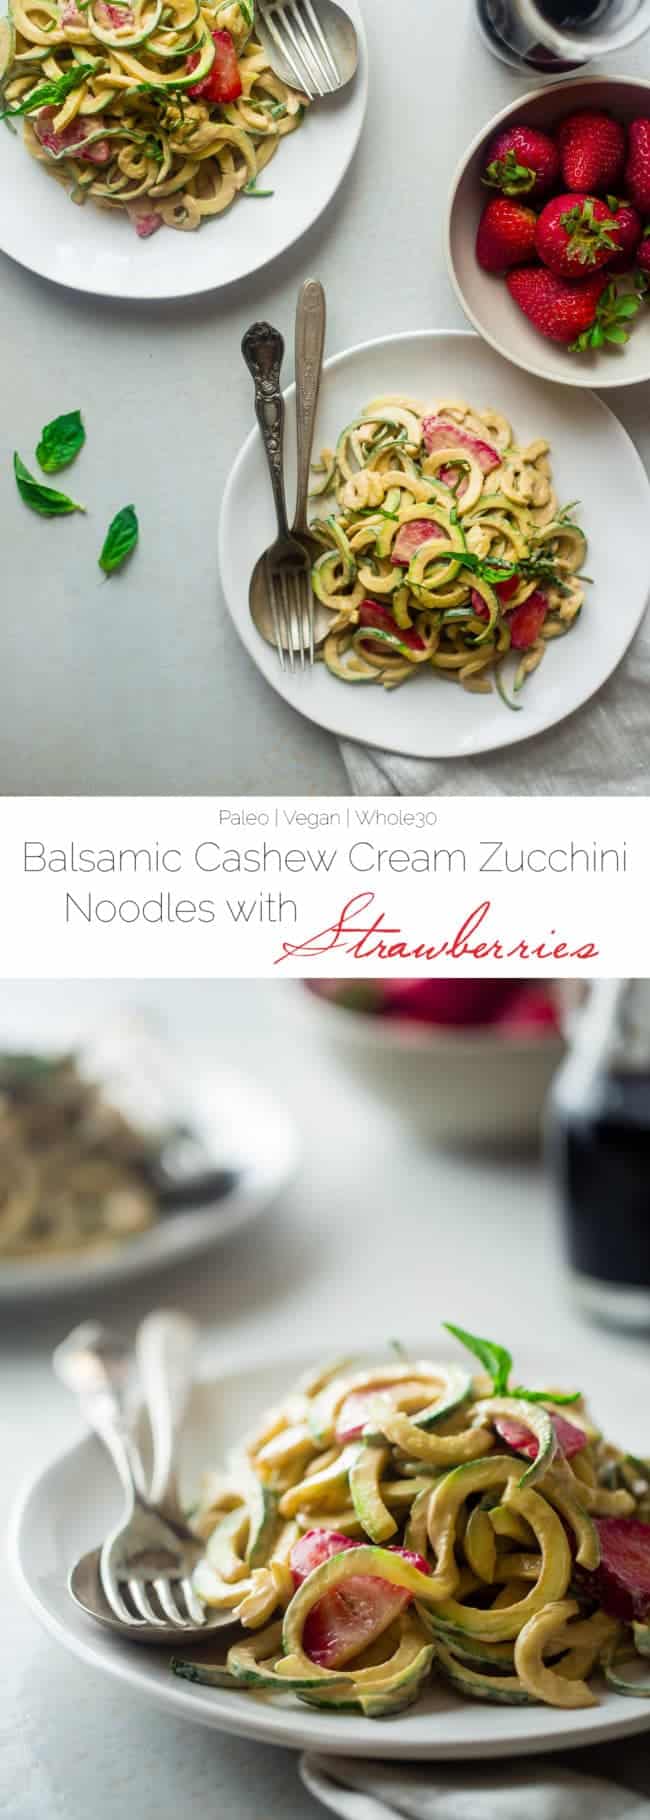 Vegan Strawberry Zucchini Noodles with Balsamic Cashew Cream - A simple, 20 minute healthy summer meal that requires no cooking, has only 6 ingredients and is paleo friendly, whole30 compliant and is under 300 calories! | Foodfaithfitness.com | @FoodFaithFit